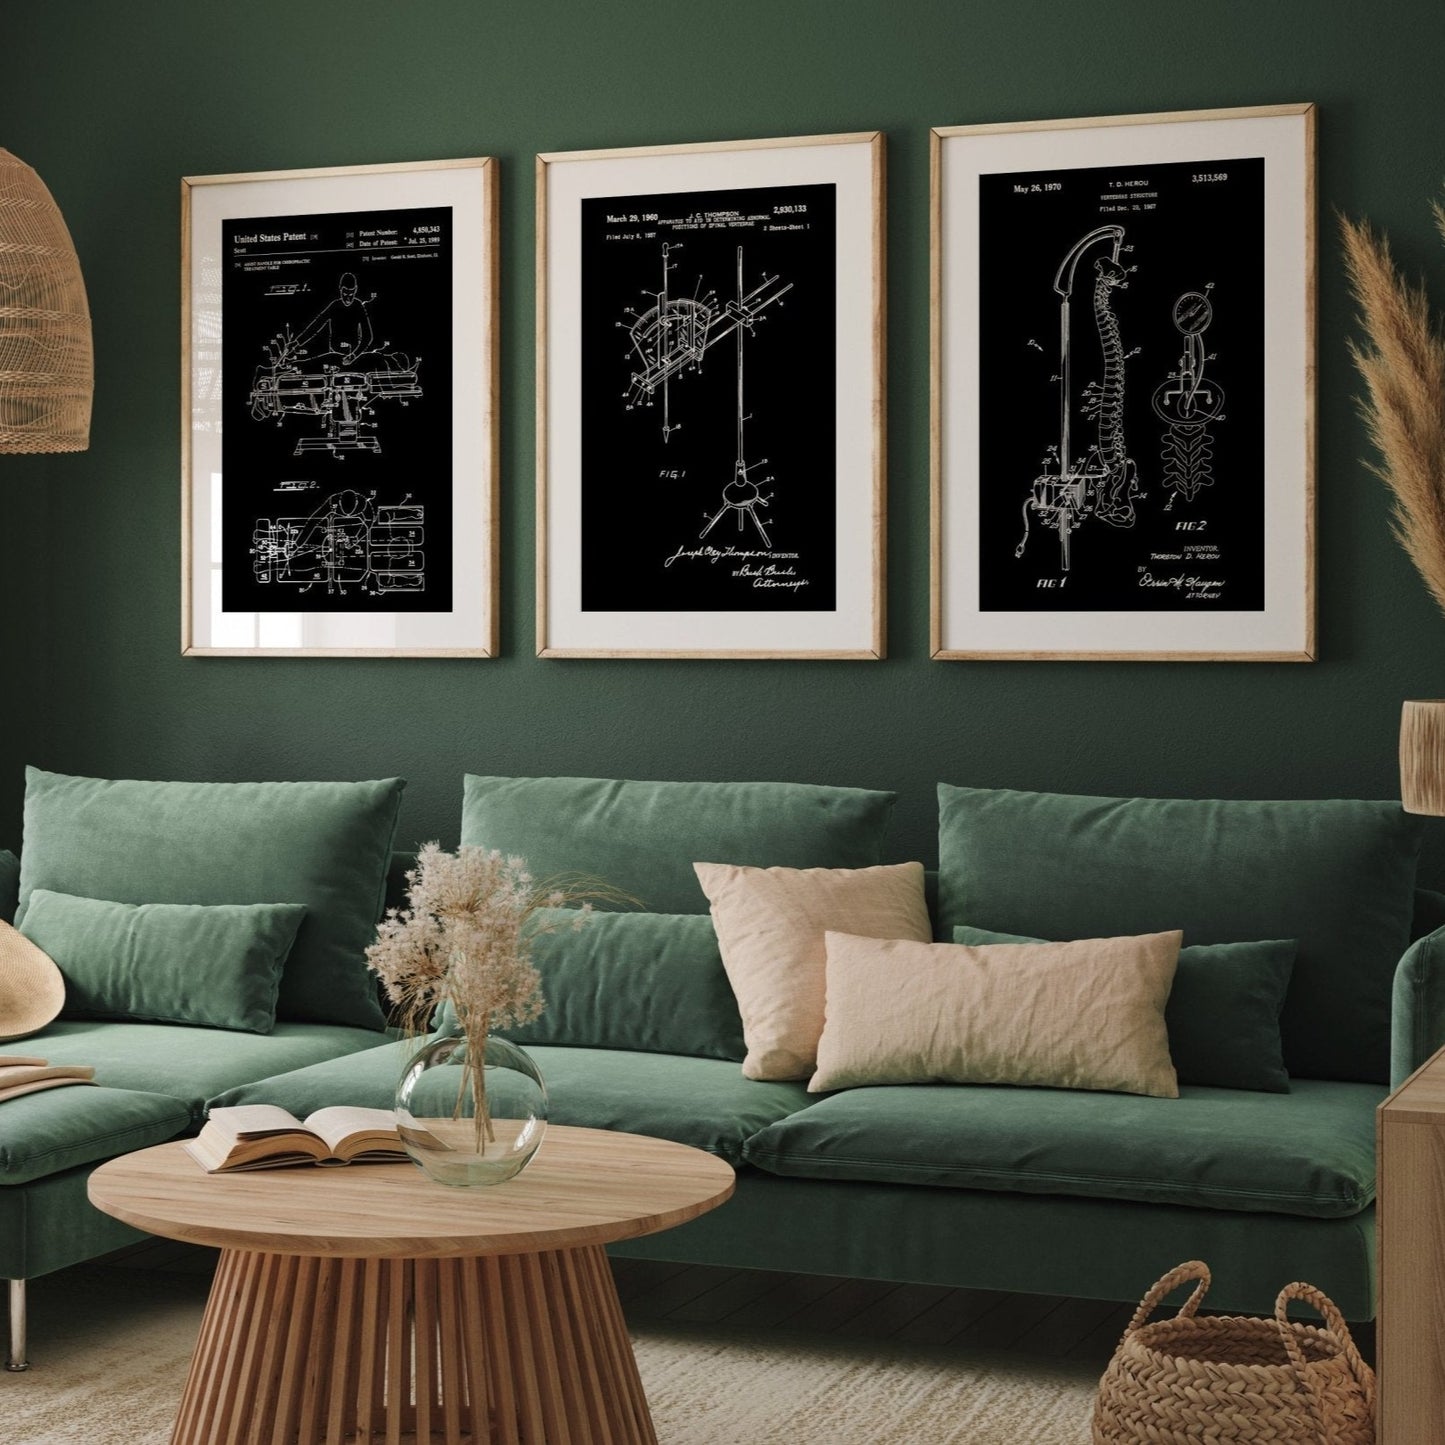 Chiropractor Set Of 3 Patent Prints - Magic Posters